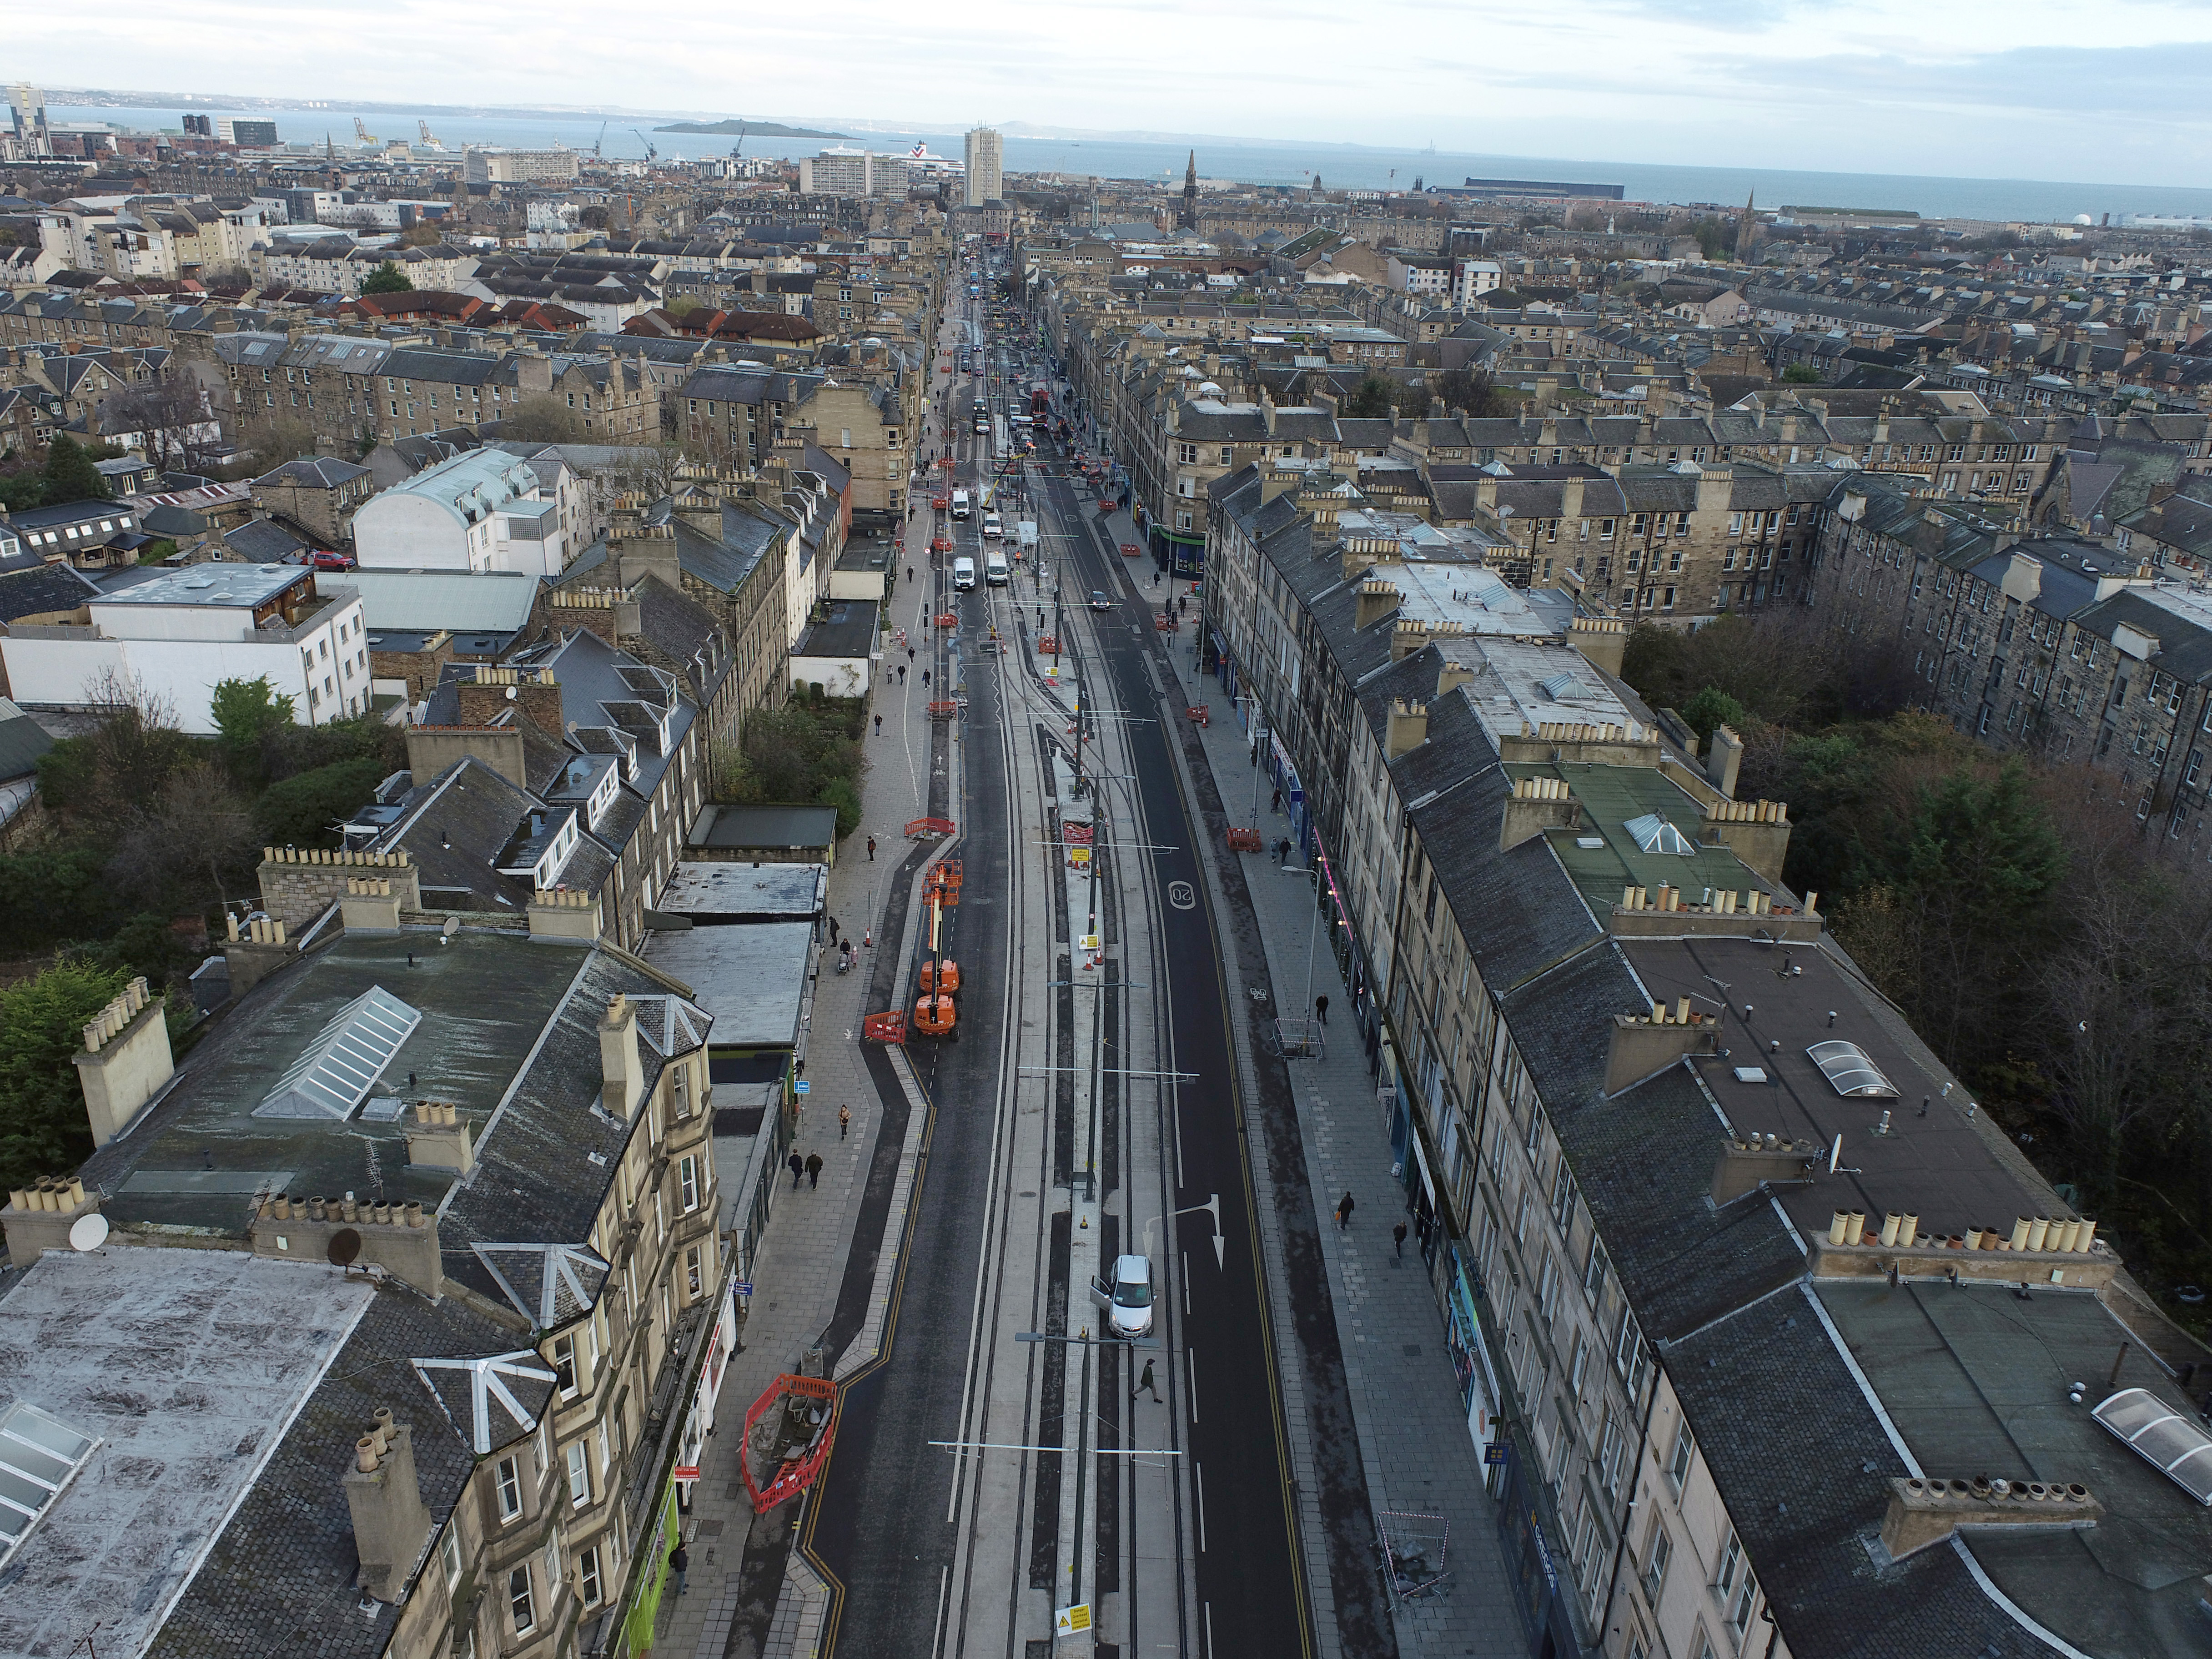 Aerial view of a section of Leith Walk with the sea in the distance